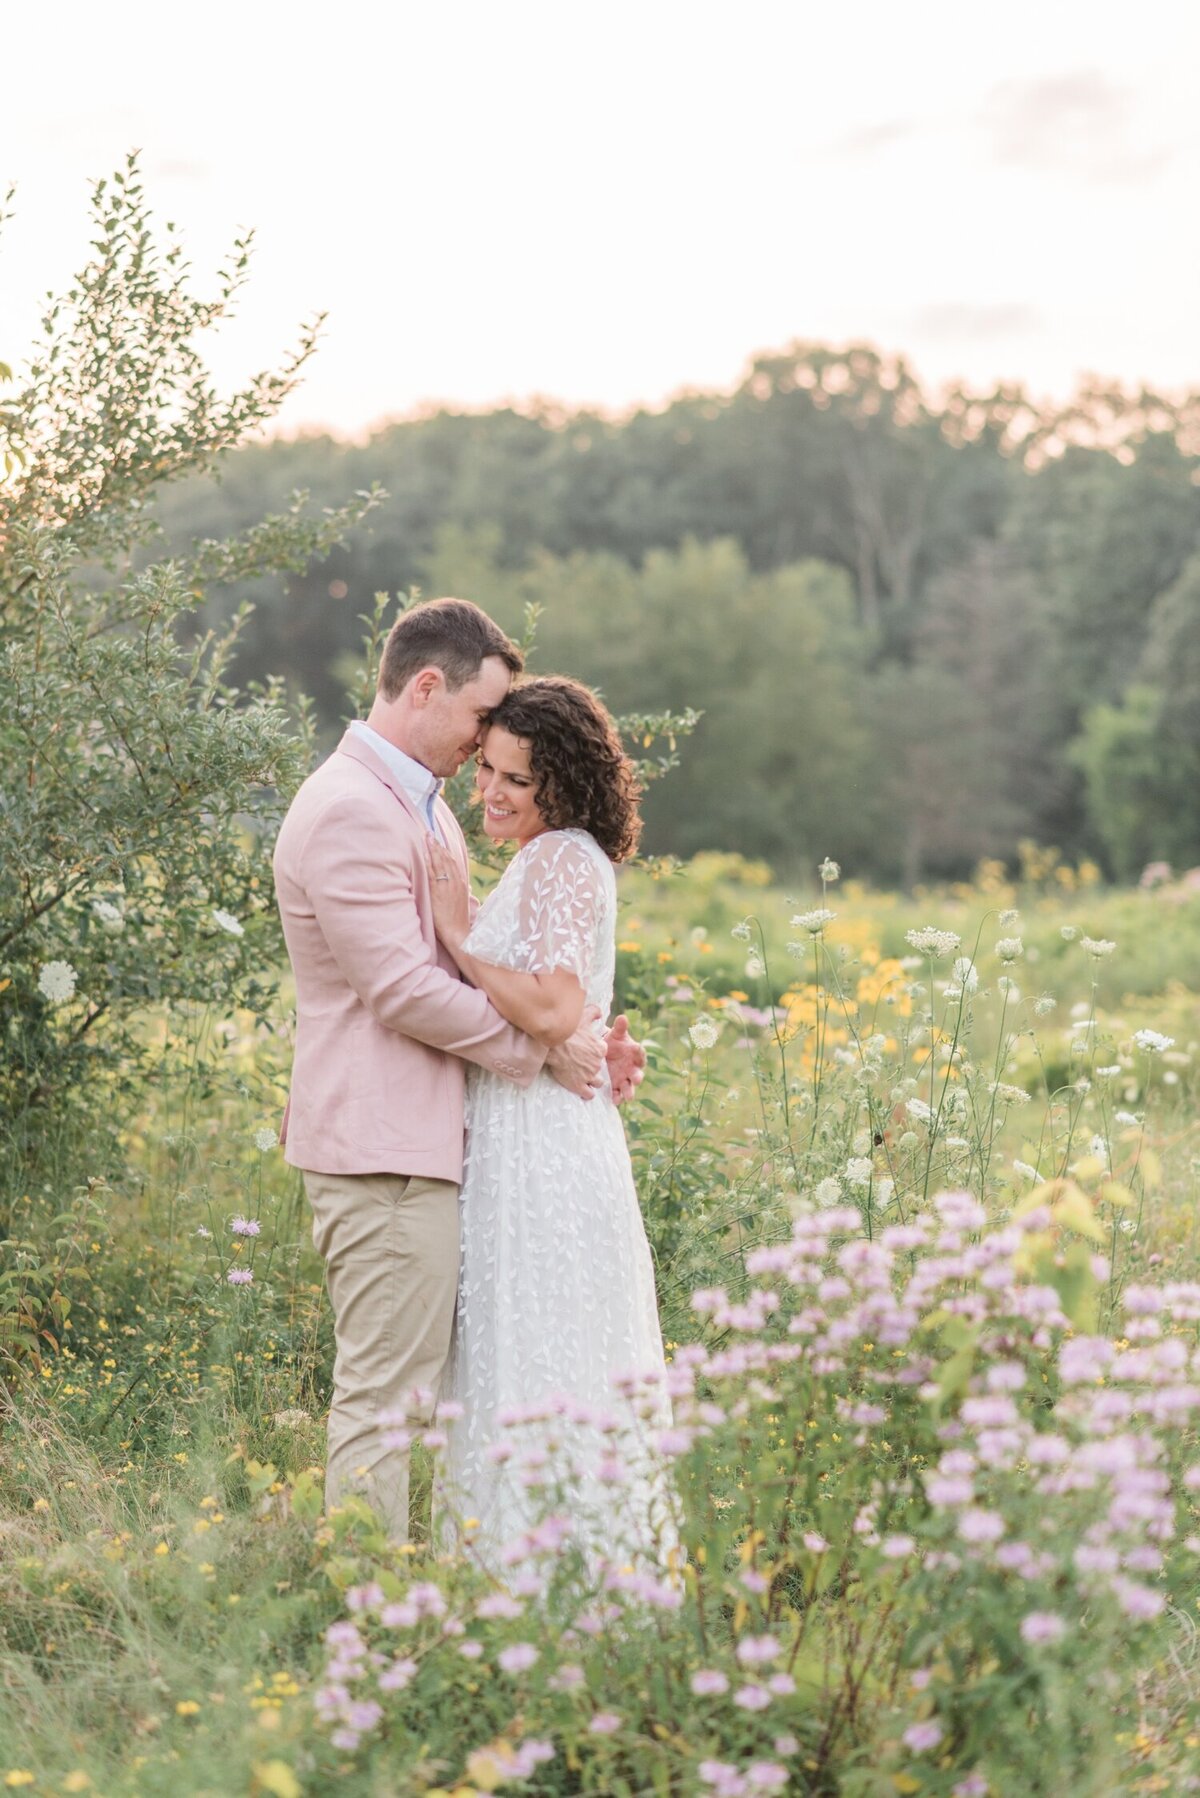 Romantic Picnic Engagement Session at Metea Park by Courtney Rudicel Wedding Photographer in Fort Wayne_0019